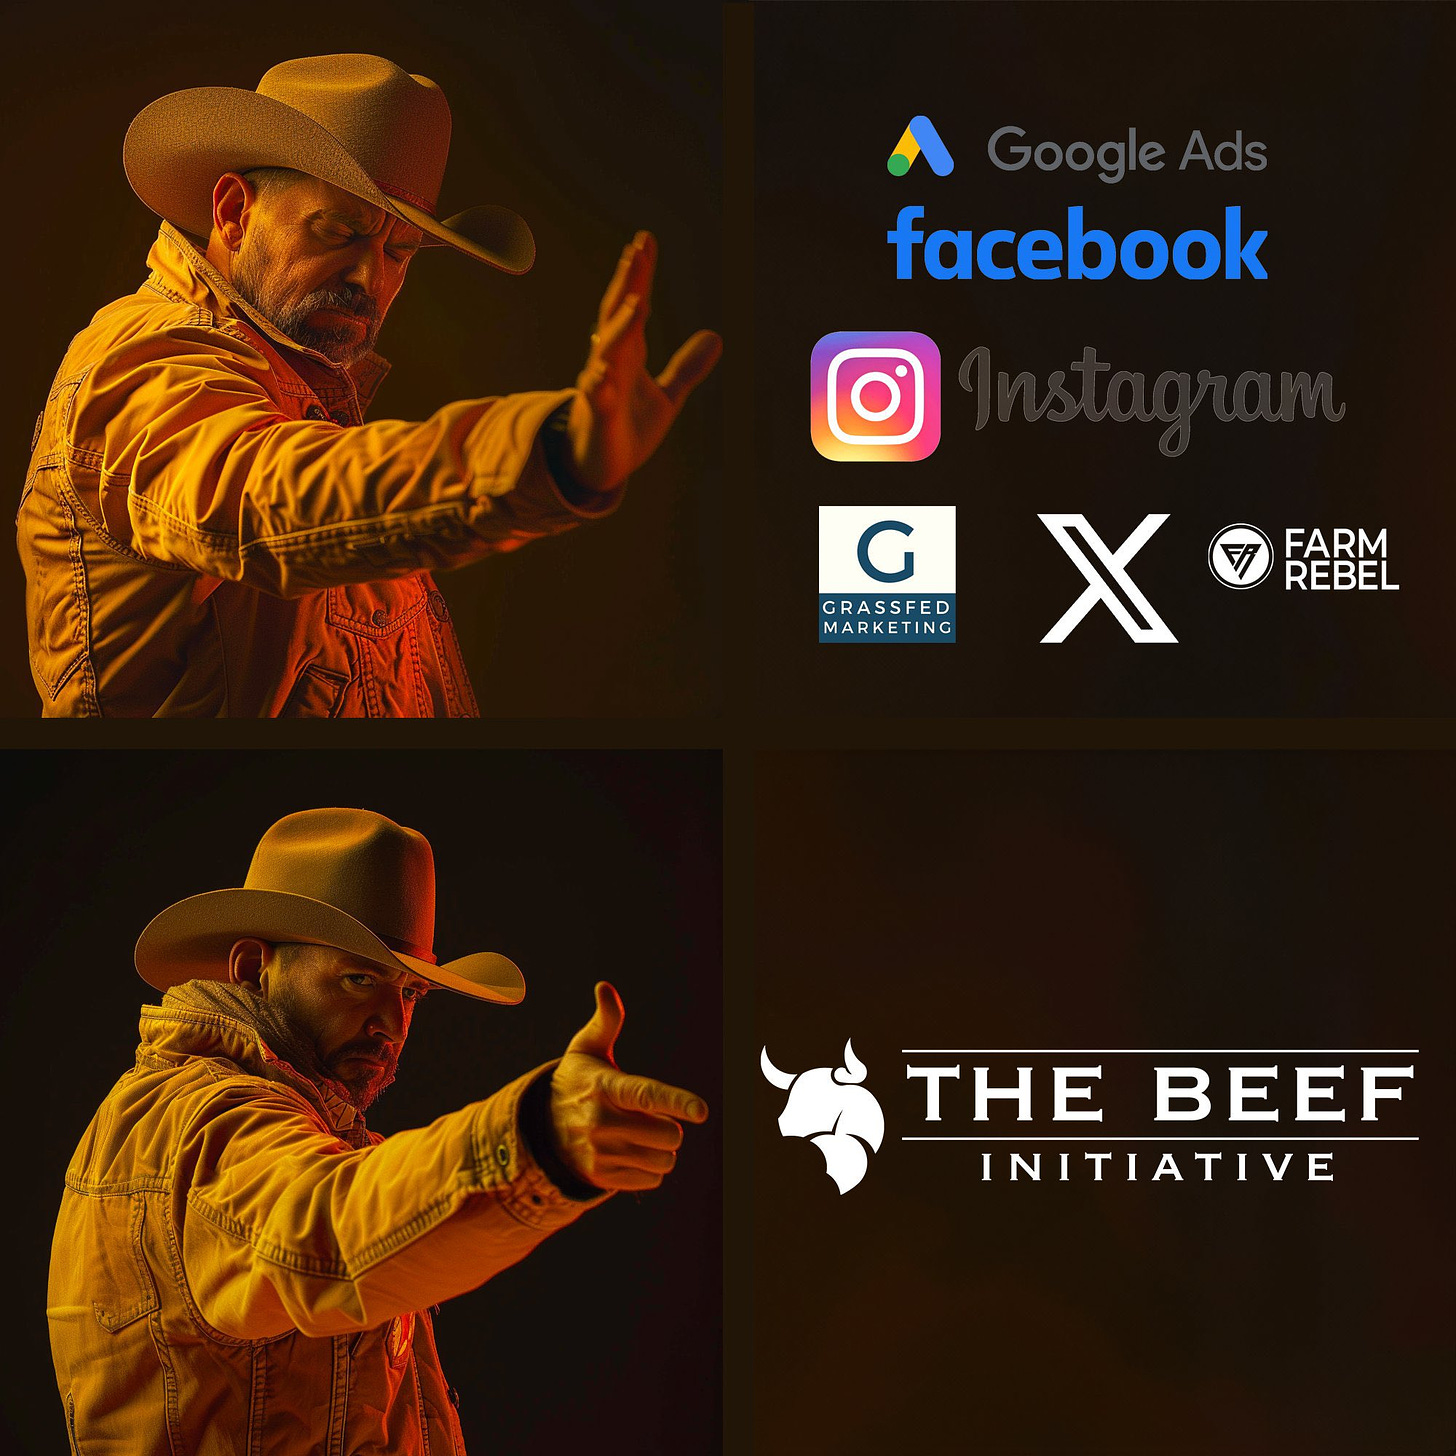 May be a graphic of 2 people and text that says 'facebook X FARM REBEL GRASSFE GX G G MARKETING THEBEEF BEEF THE INITIATIVE'